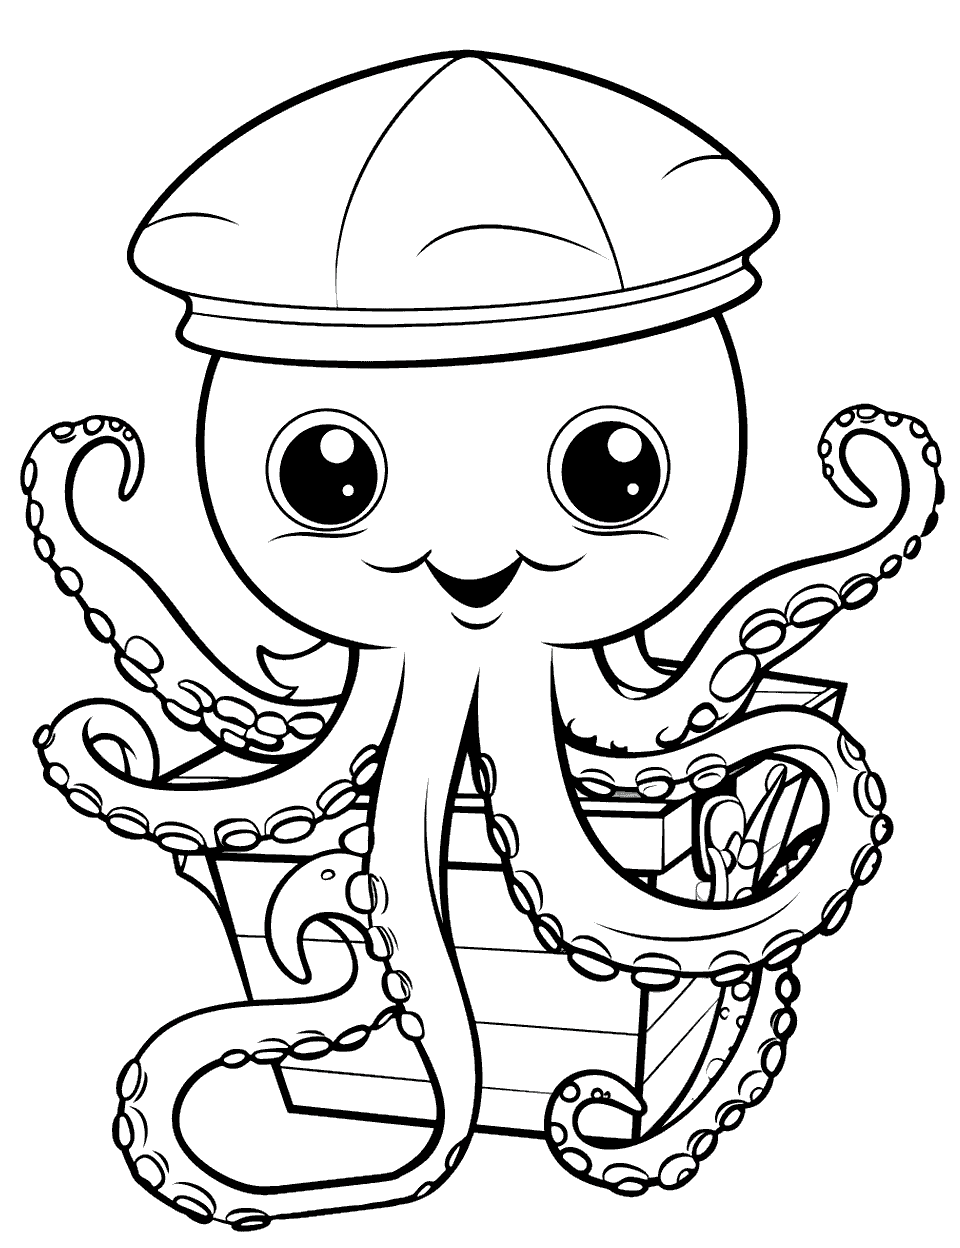 Octopus Pirate with Treasure Coloring Page - An octopus wearing a pirate hat, guarding a treasure chest.